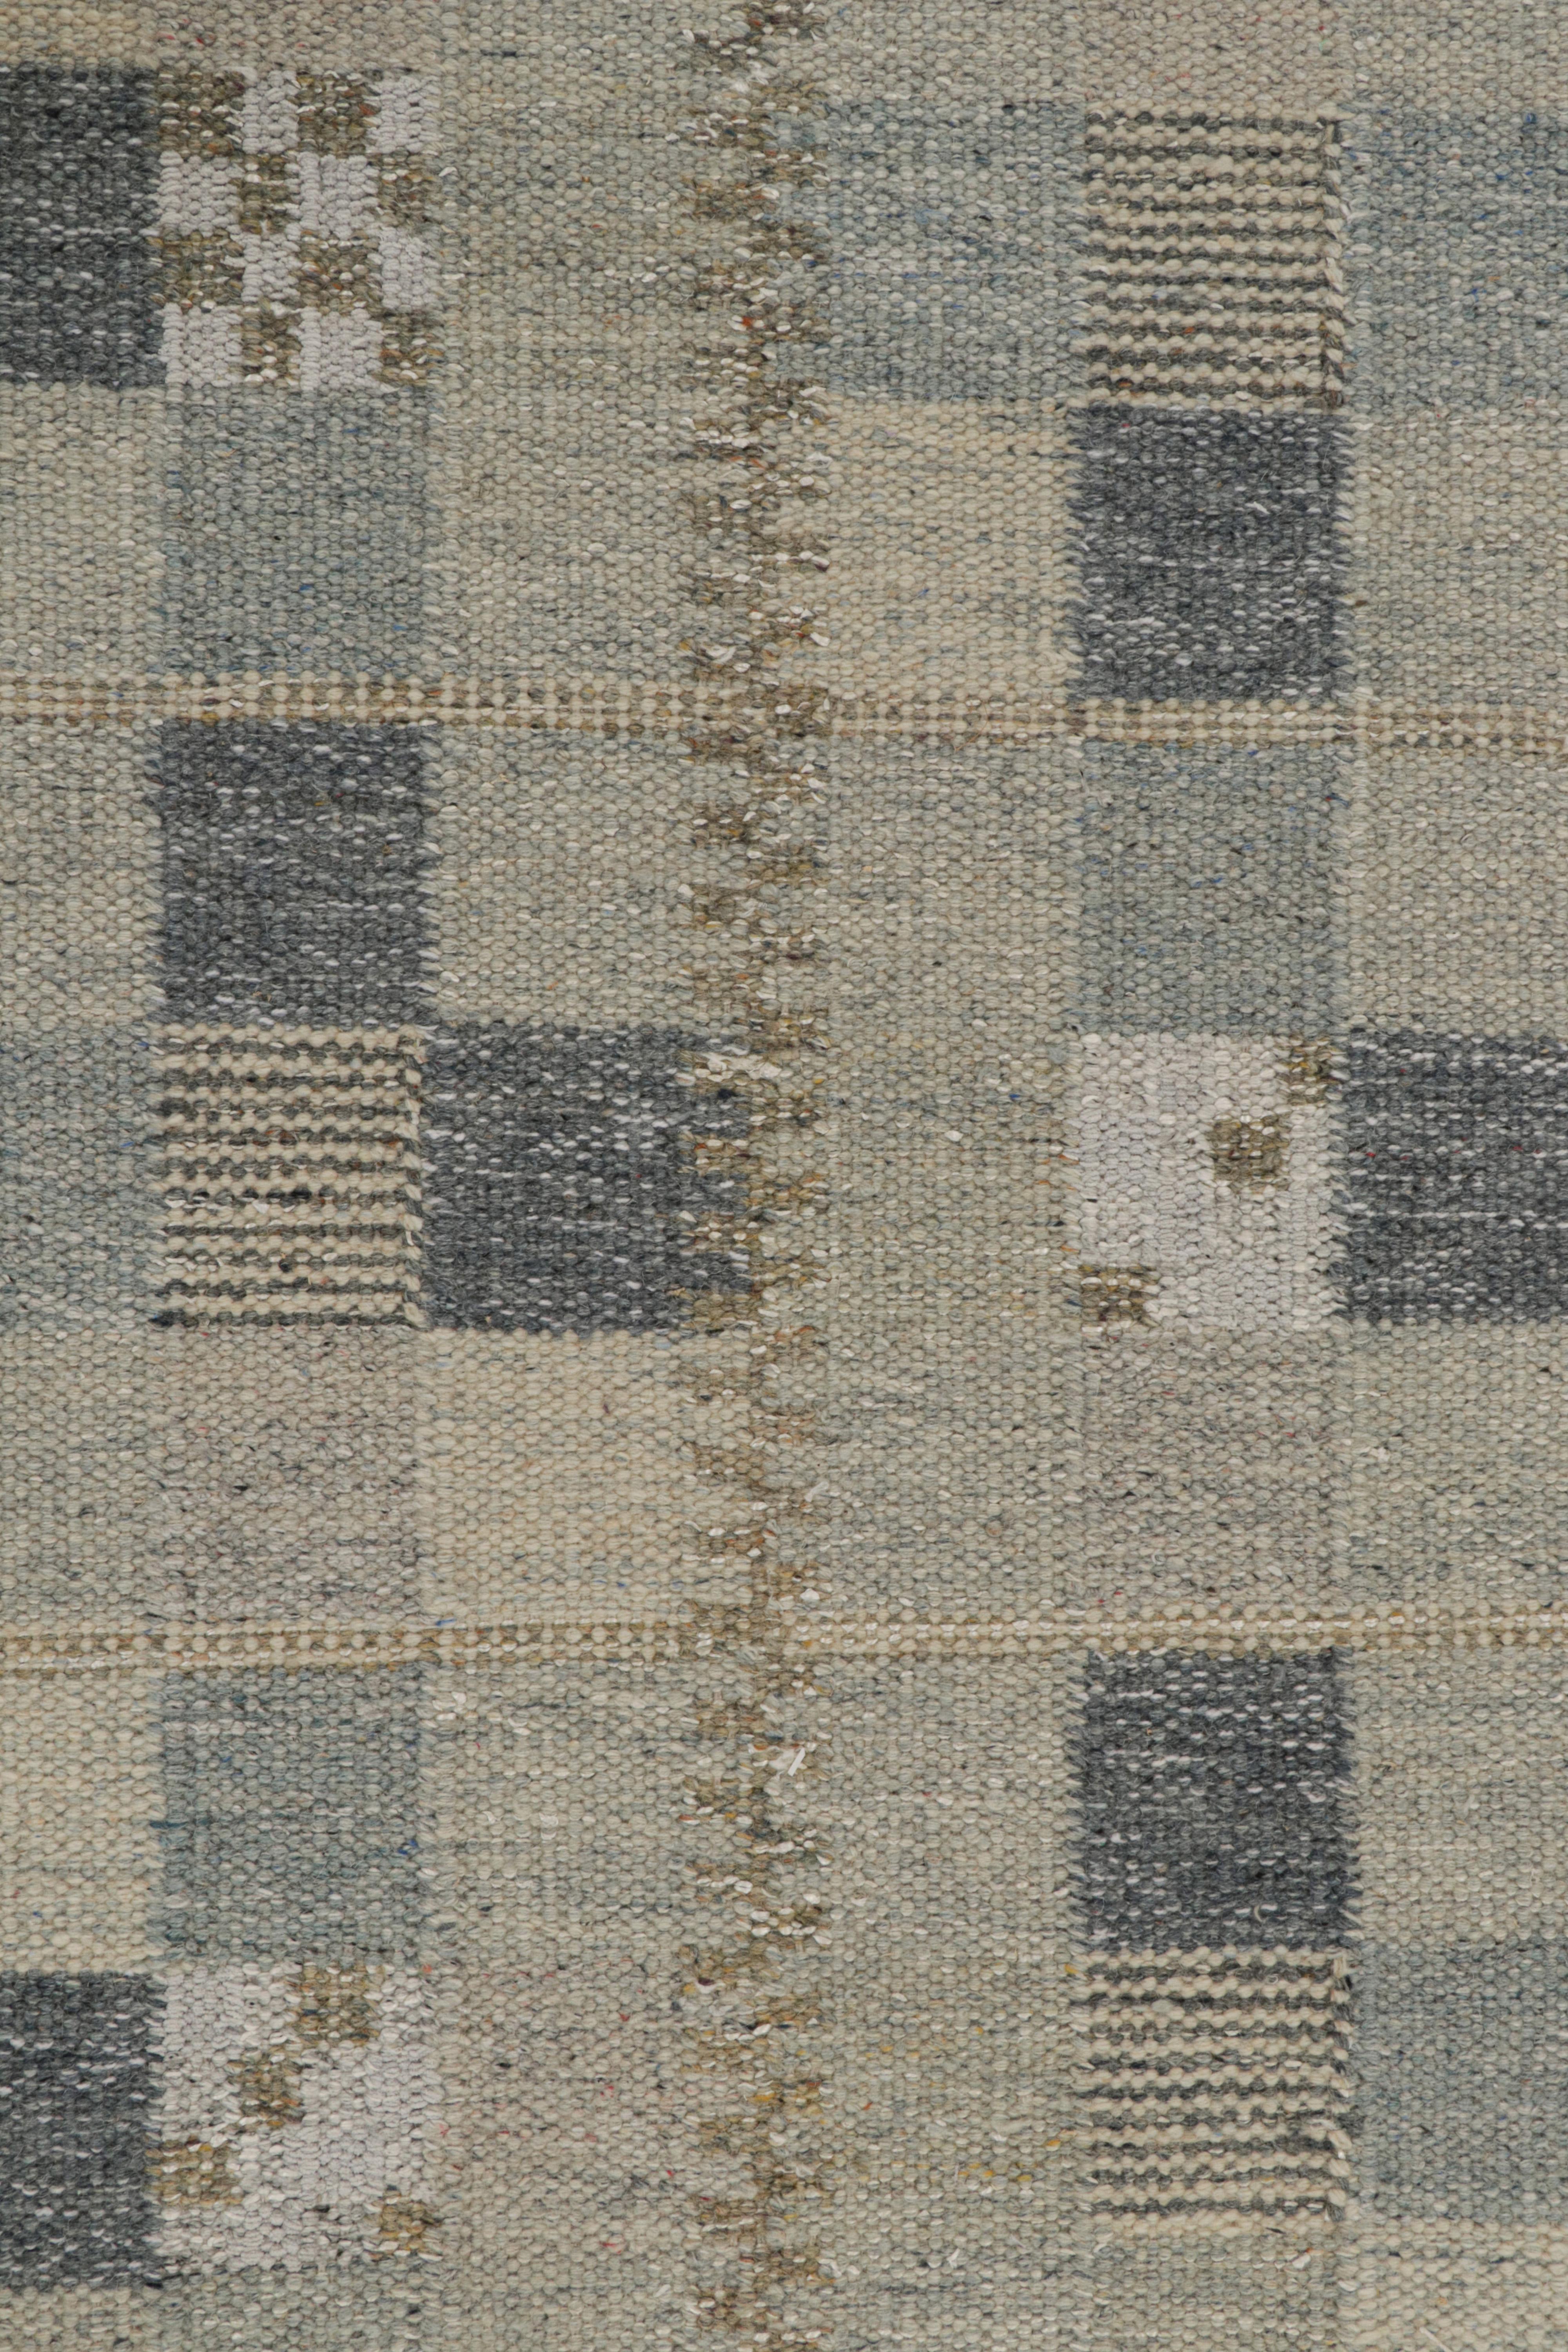 Rug & Kilim’s Scandinavian Style Kilim Runner Rug in Gray Blue Geometric Pattern In New Condition For Sale In Long Island City, NY